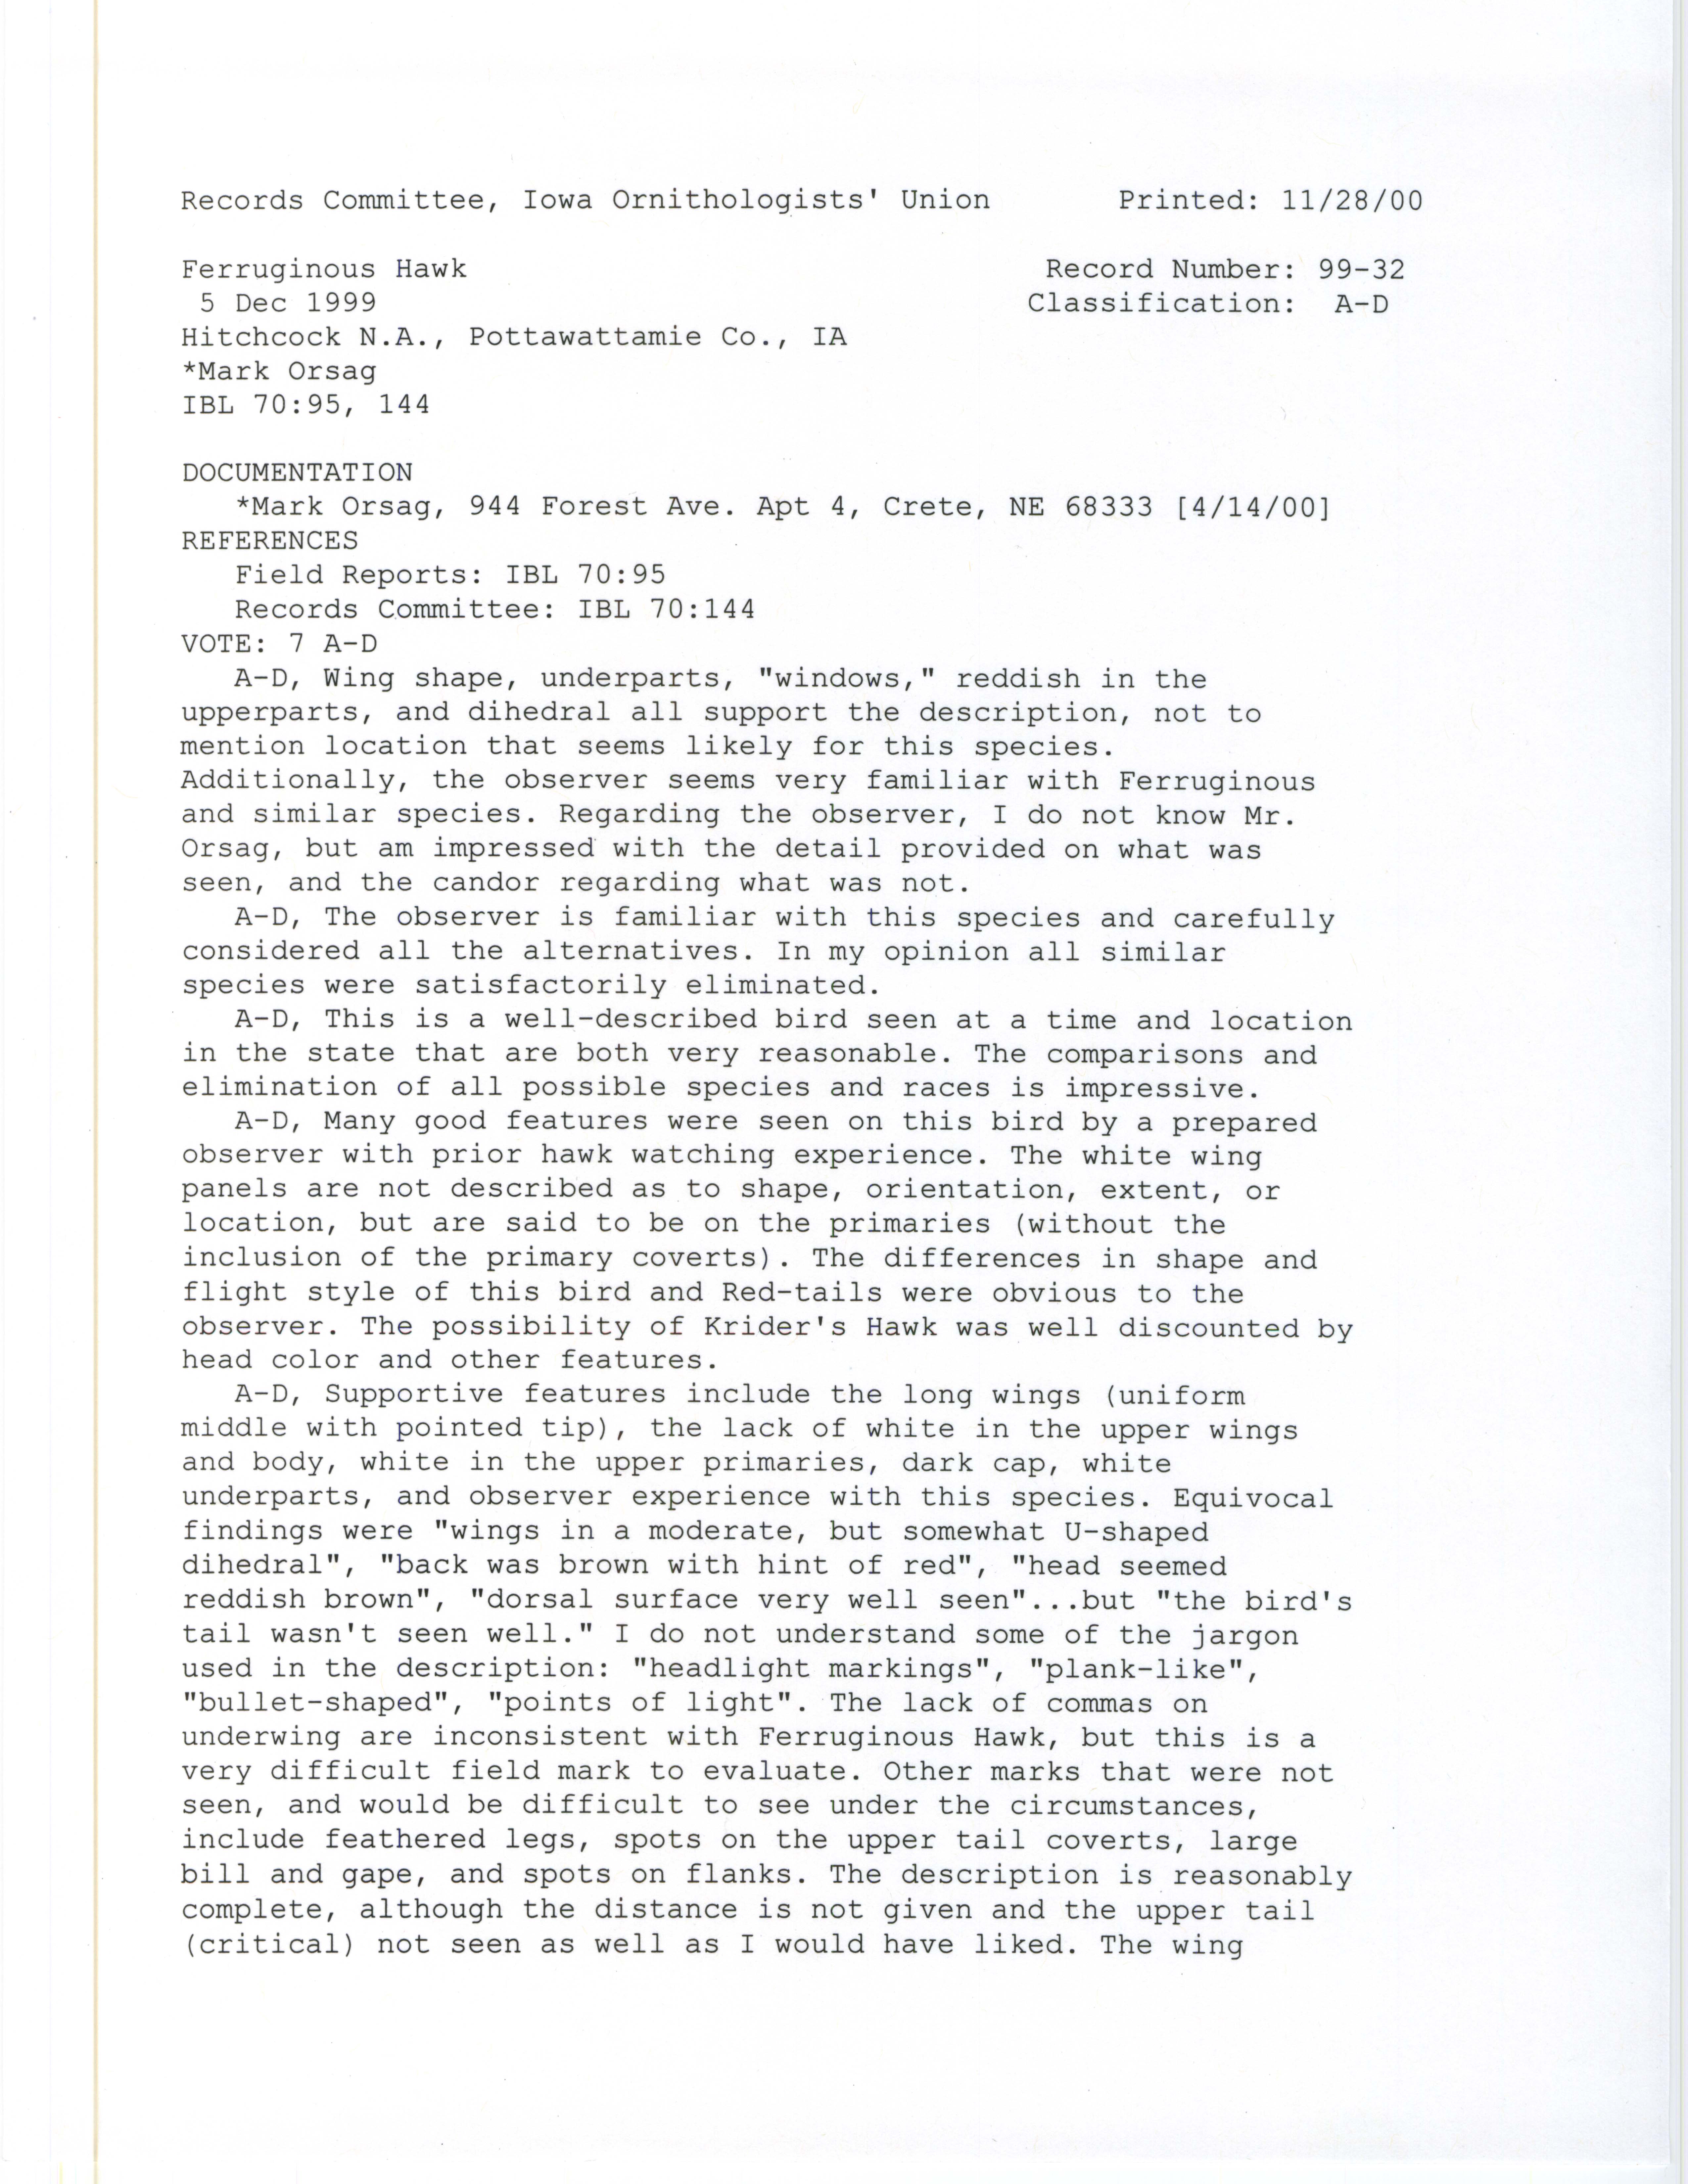 Records Committee review for rare bird sighting of Ferruginous Hawk at Hichcock Nature Area, 1999